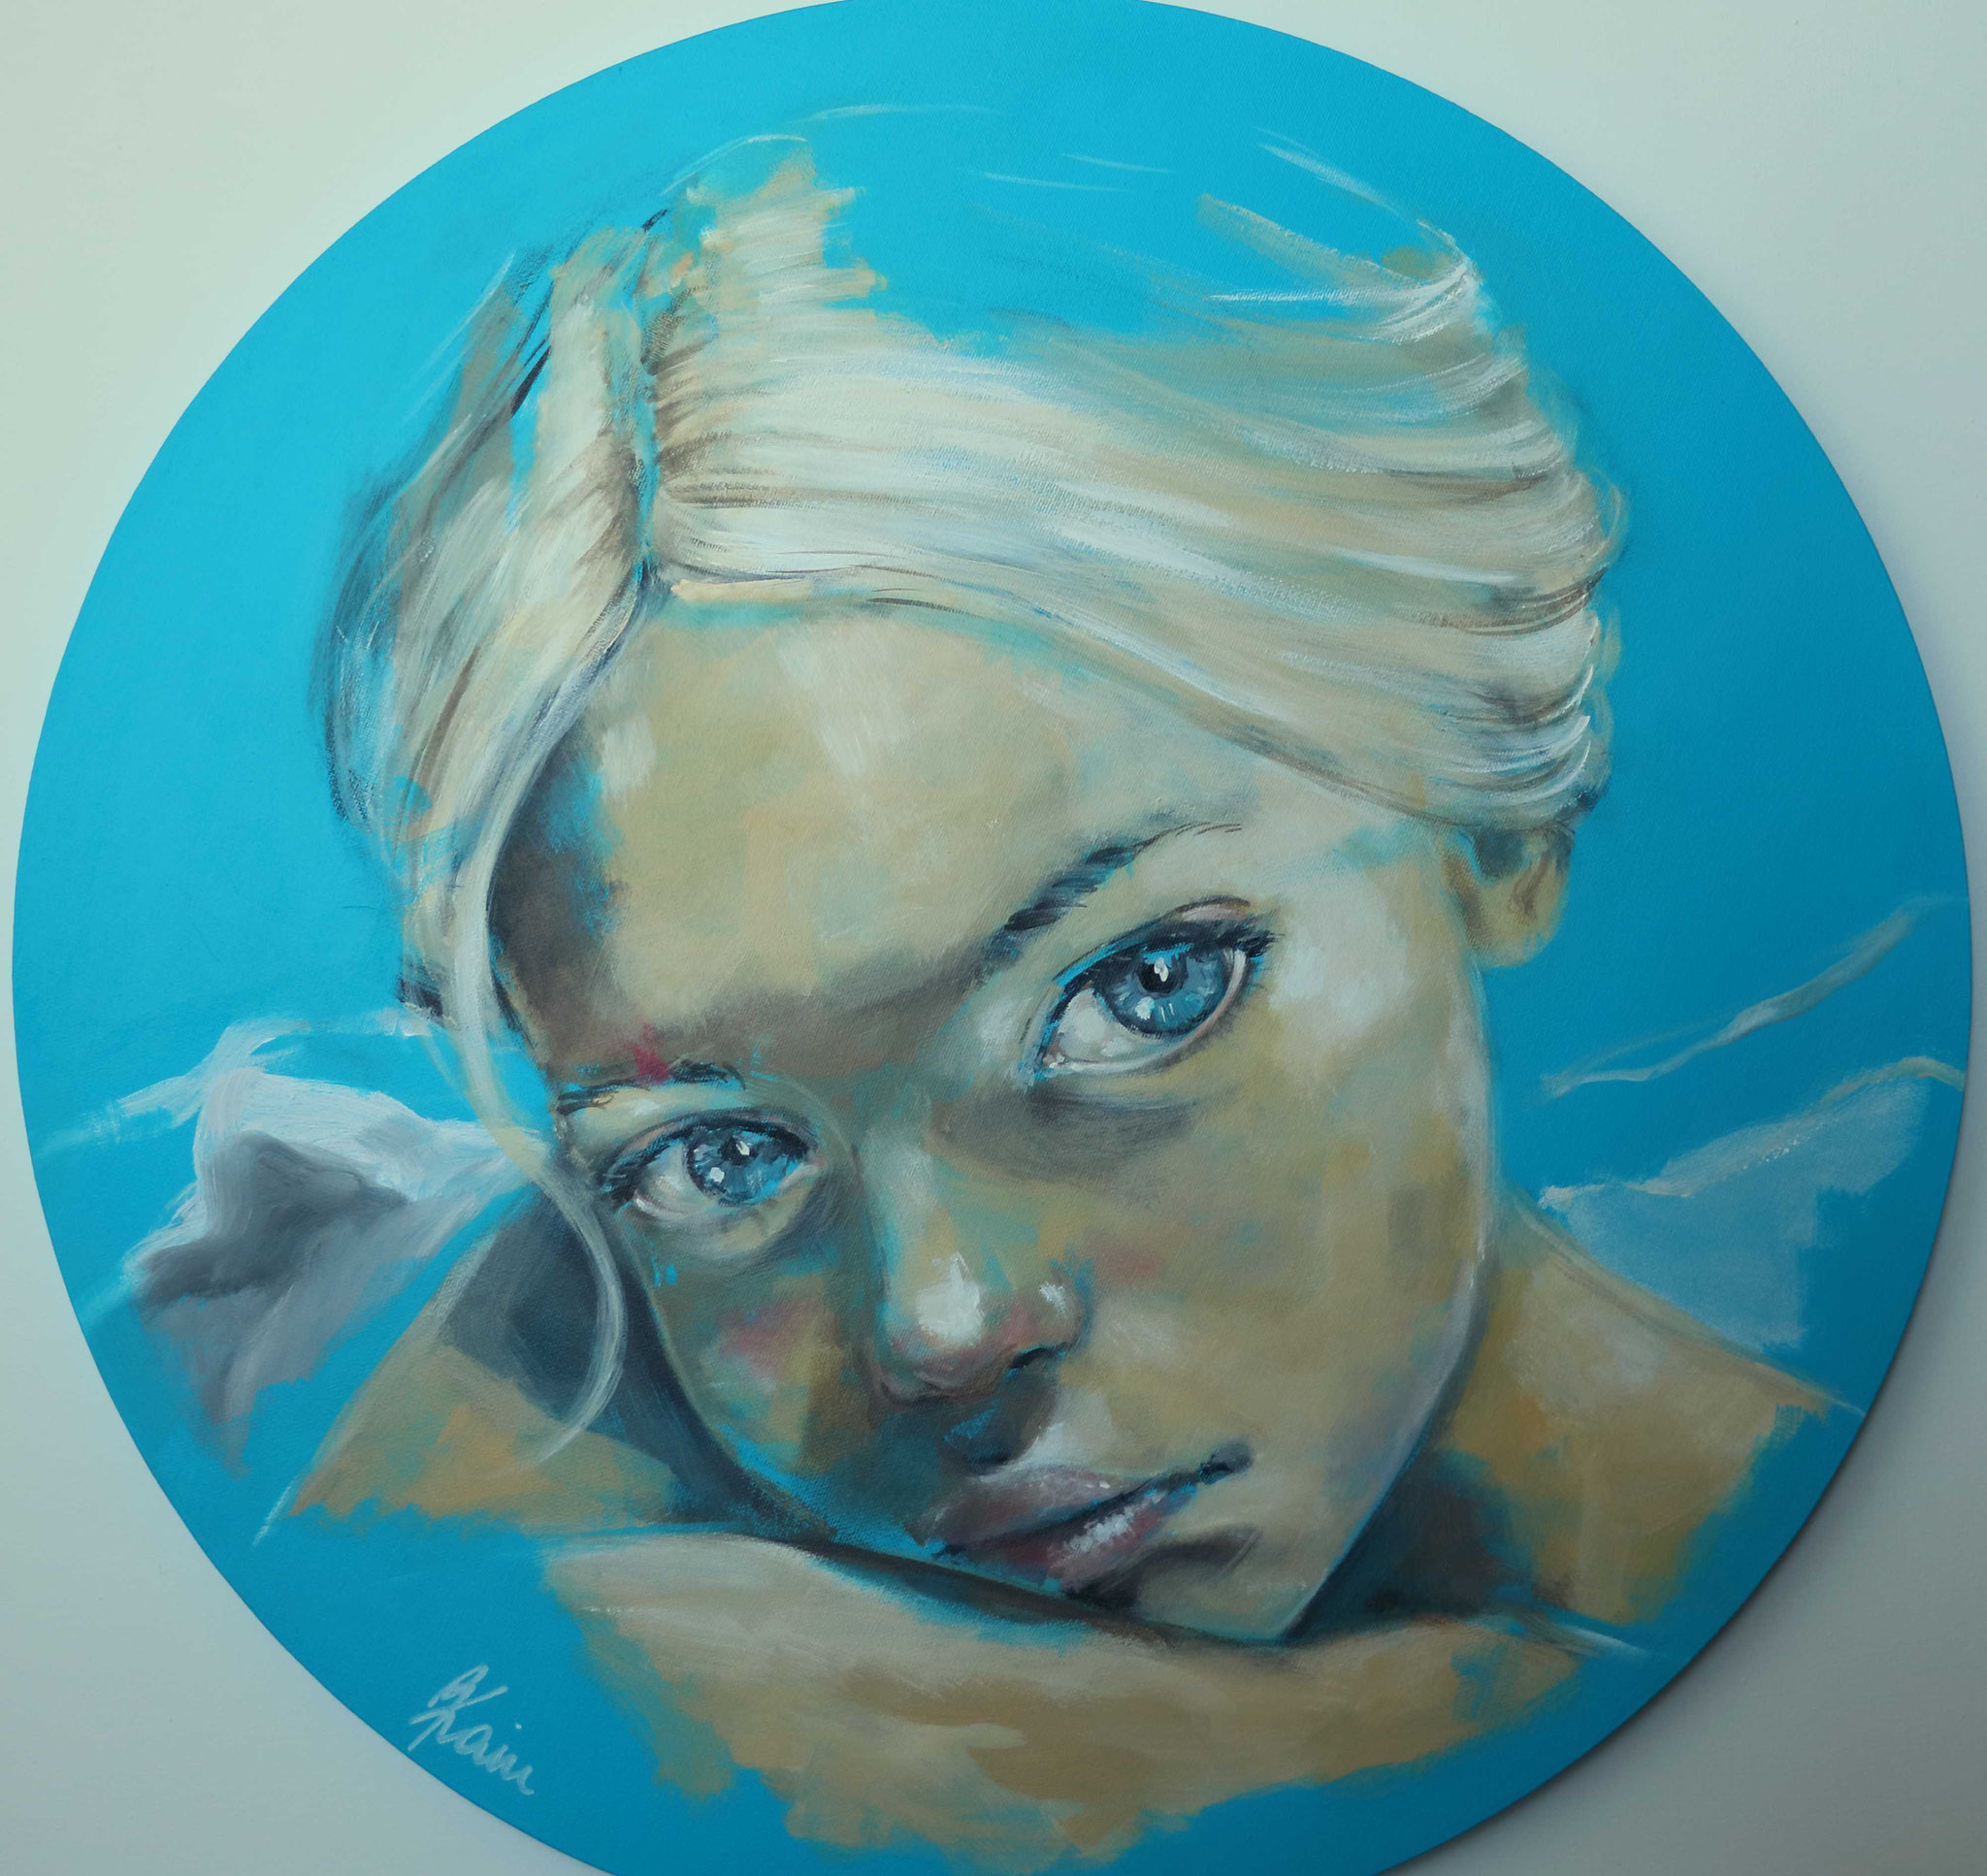 ANGELFACE, 60 x 60 cm, Round canvas, Acrylic and pencils on canvas